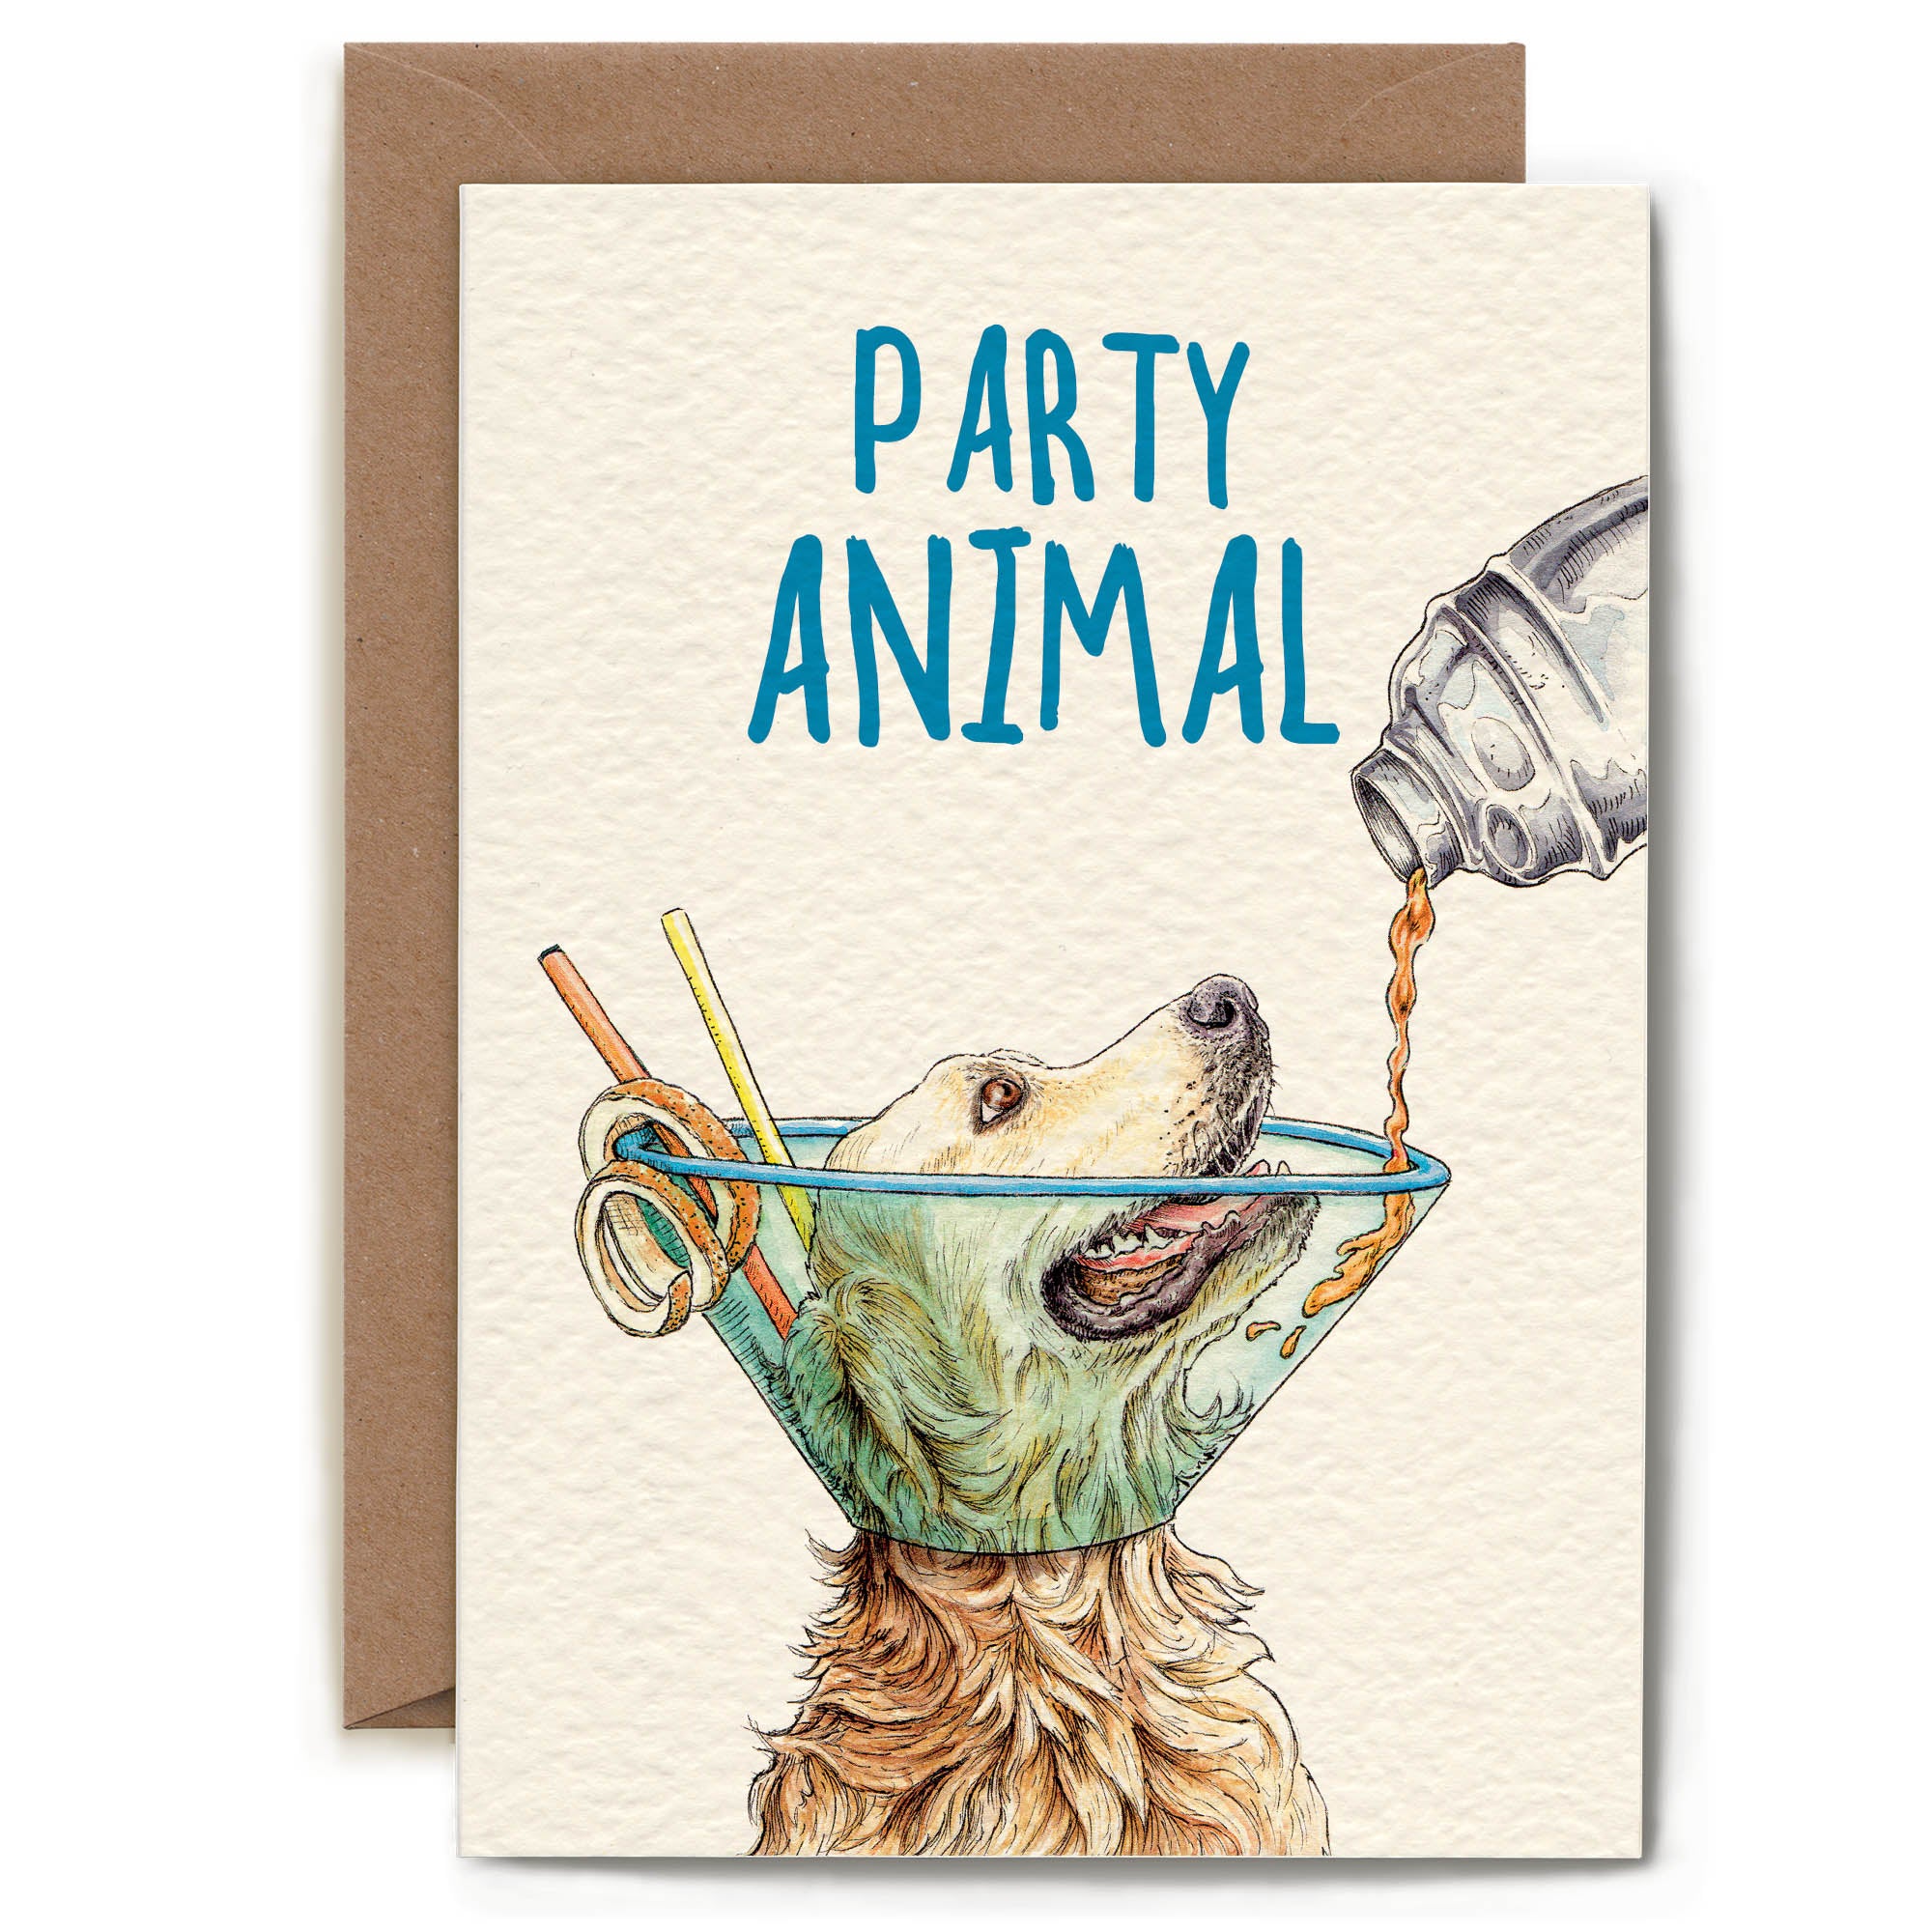 Party Animal Card by Bewilderbeest